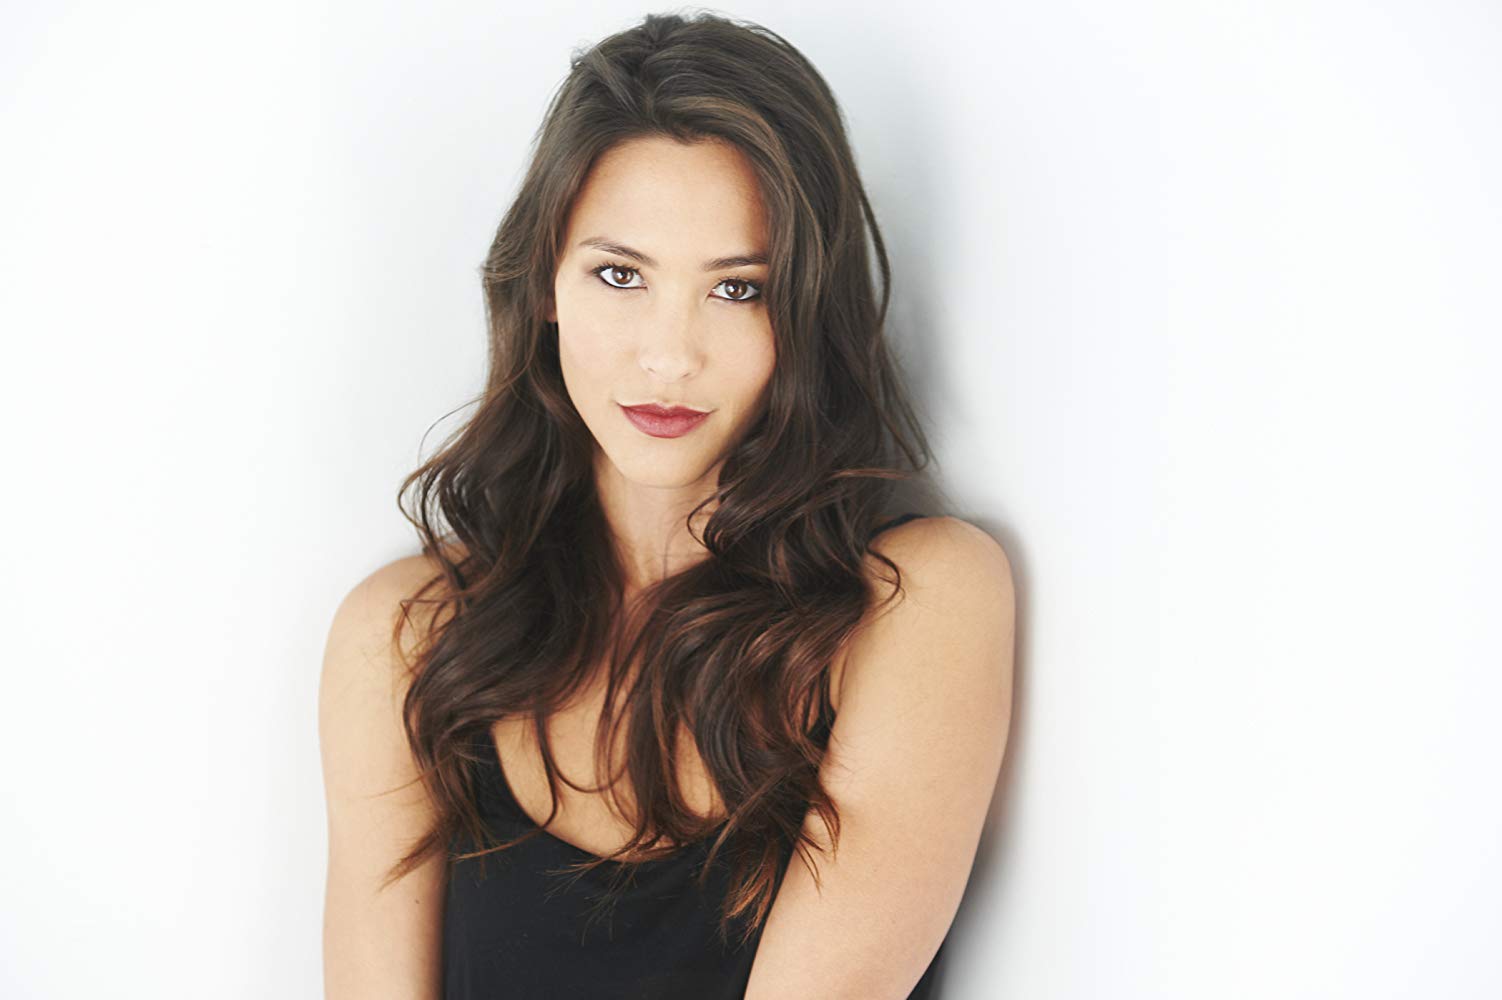 Camille Belcourt, Shadowhunters Wiki